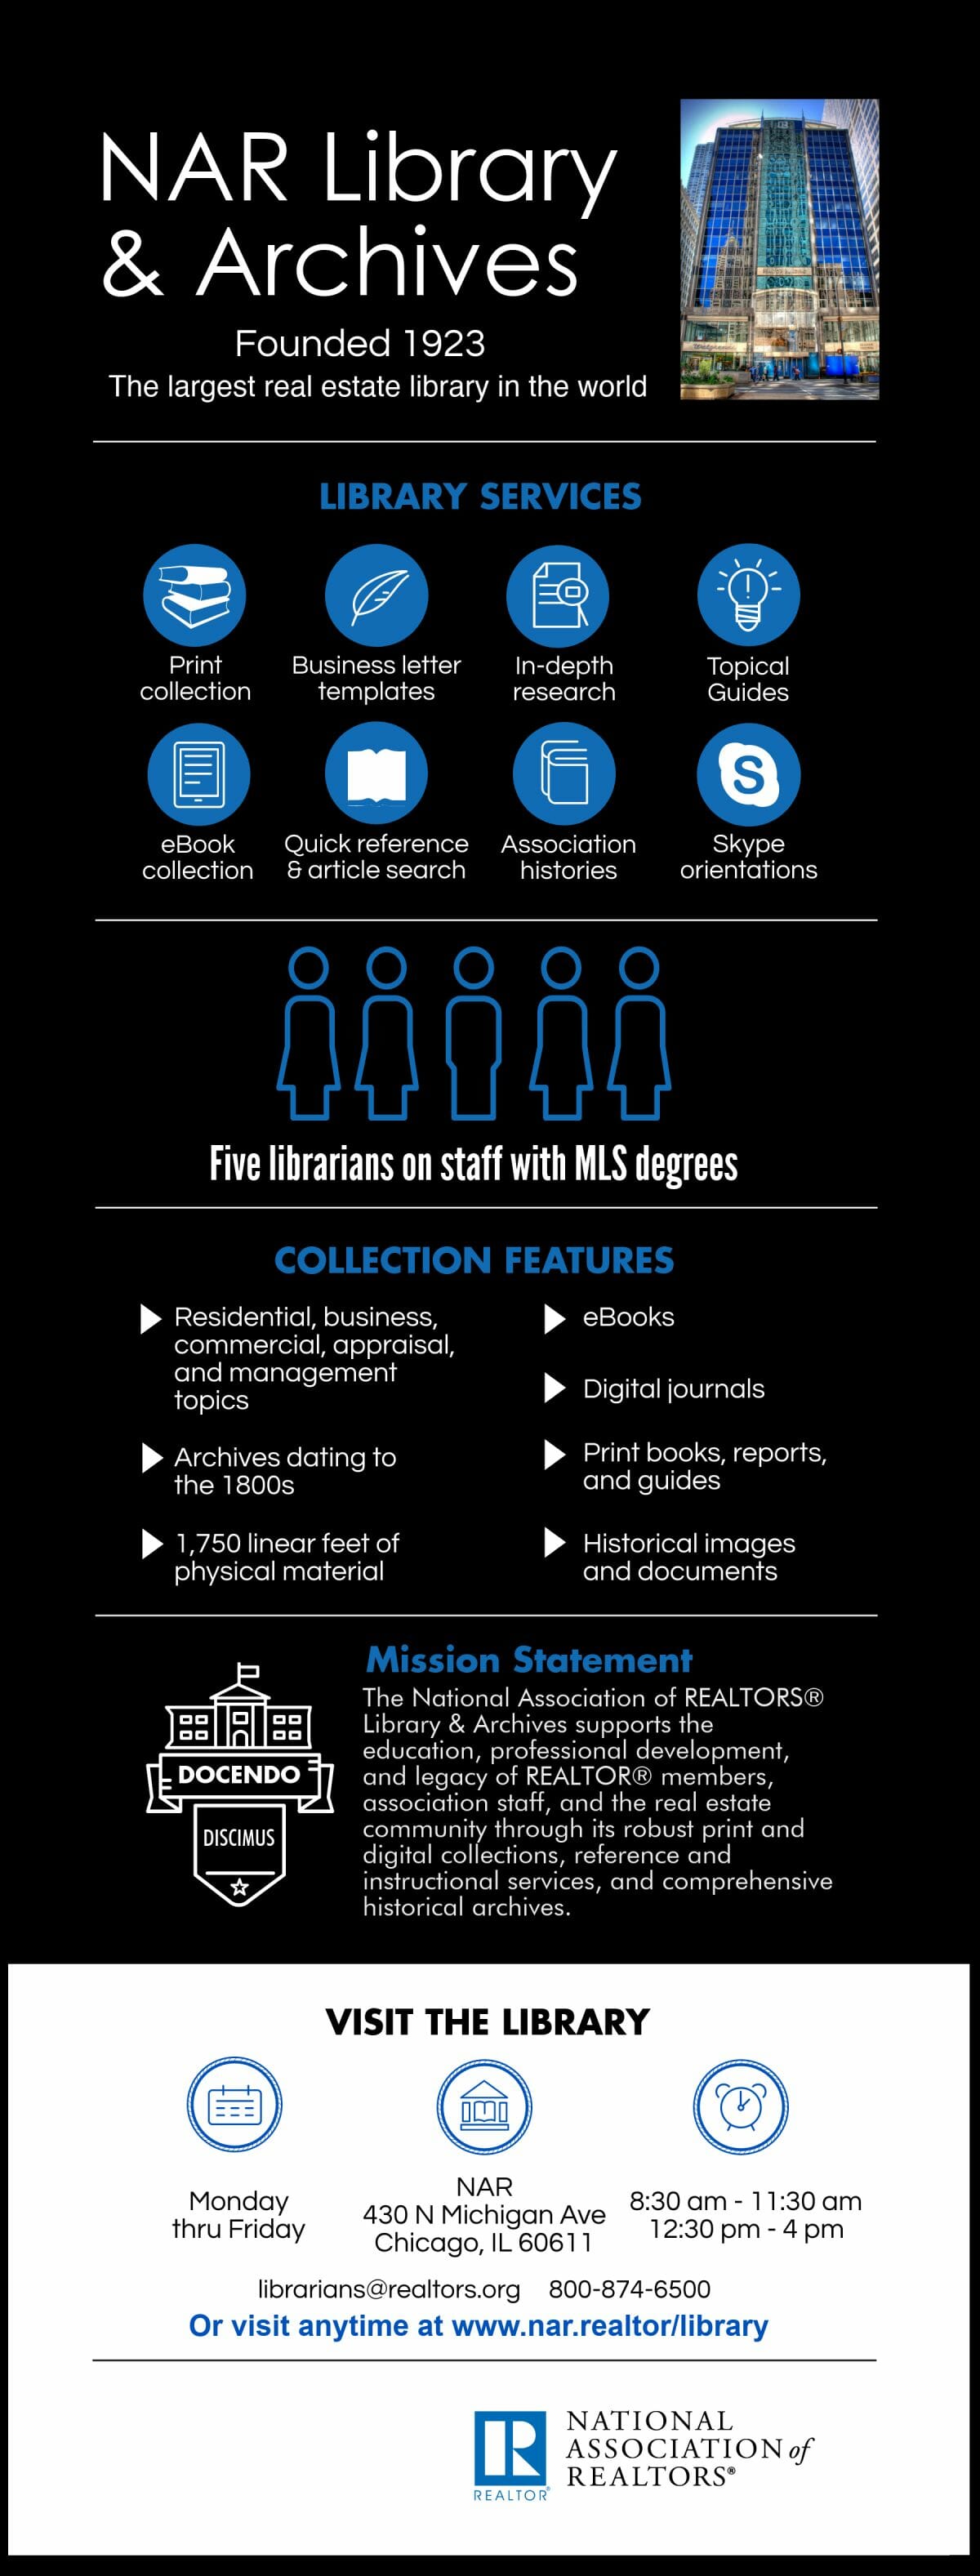 nar-library-and-archives-infographic-1800w-4731h-2018-04-12